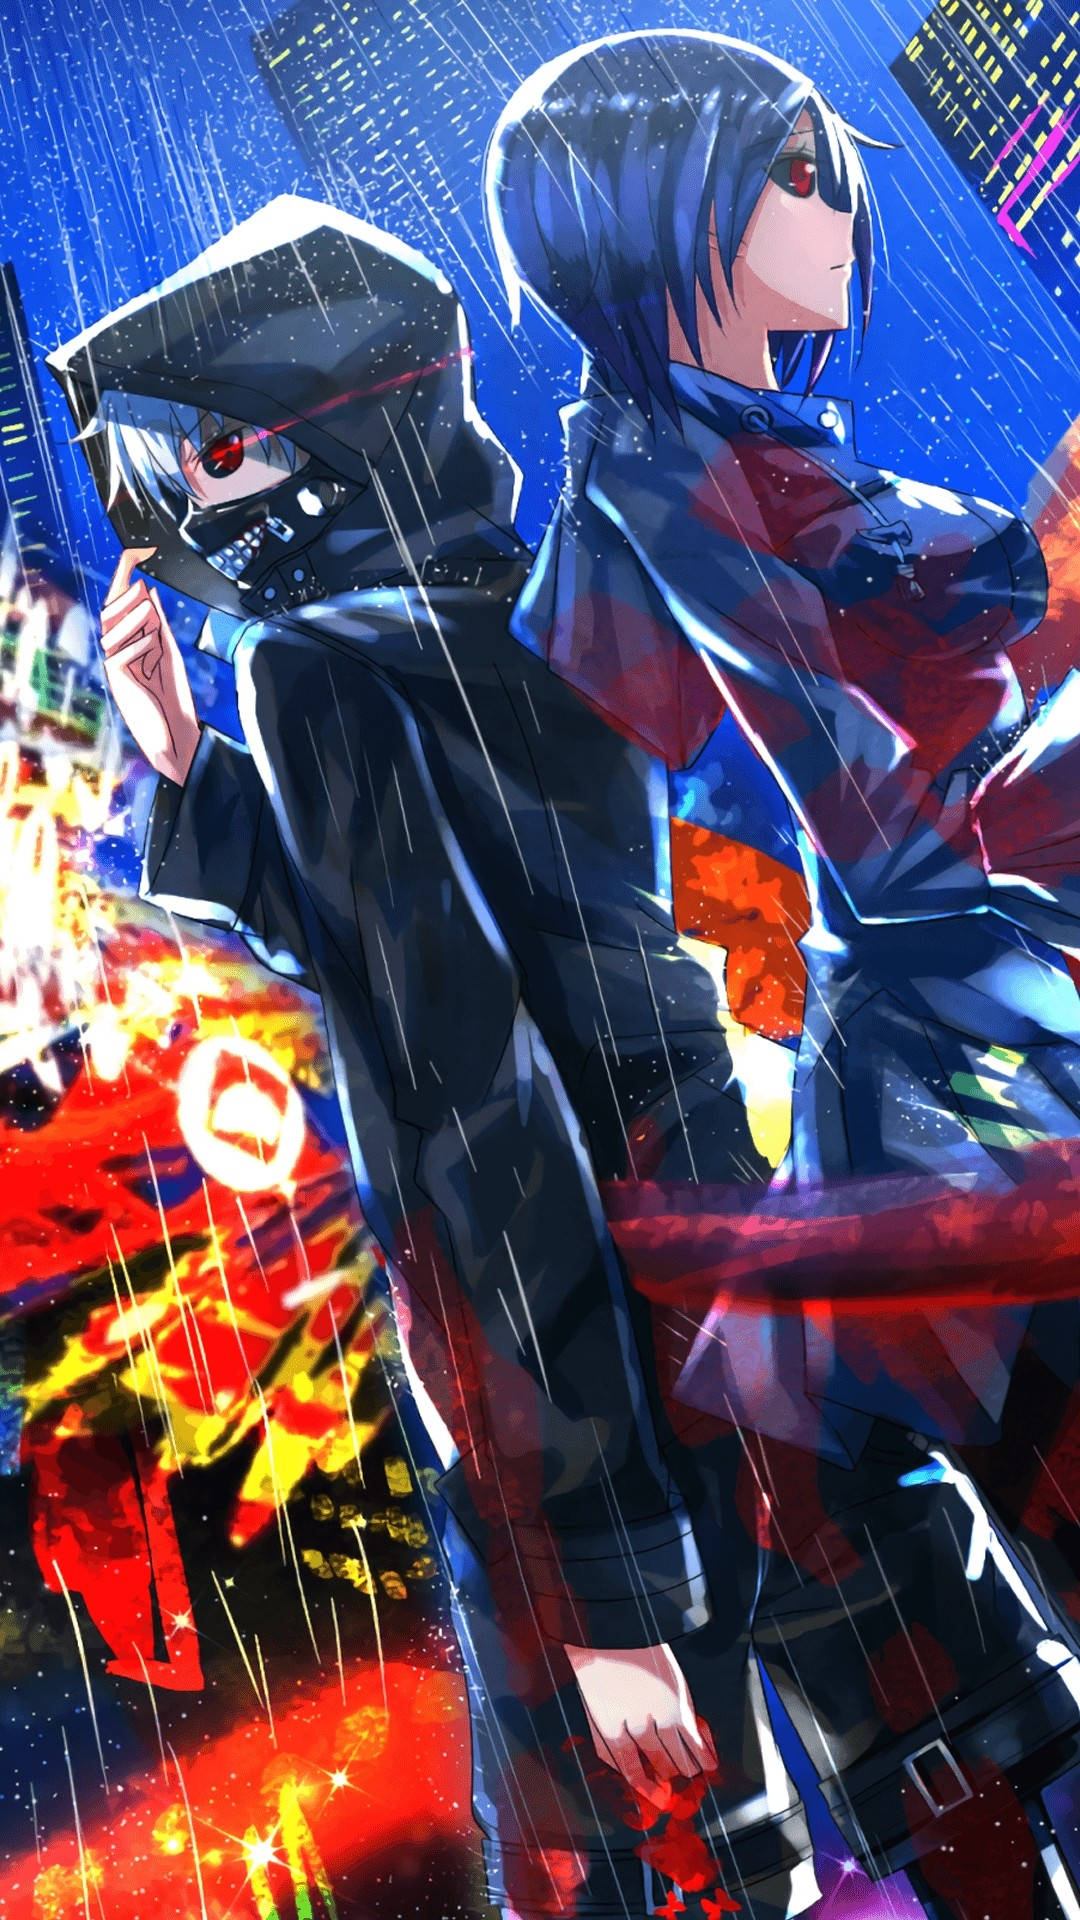 Download Ken And Touka Tokyo Ghoul Iphone Background Wallpaper | Wallpapers .com